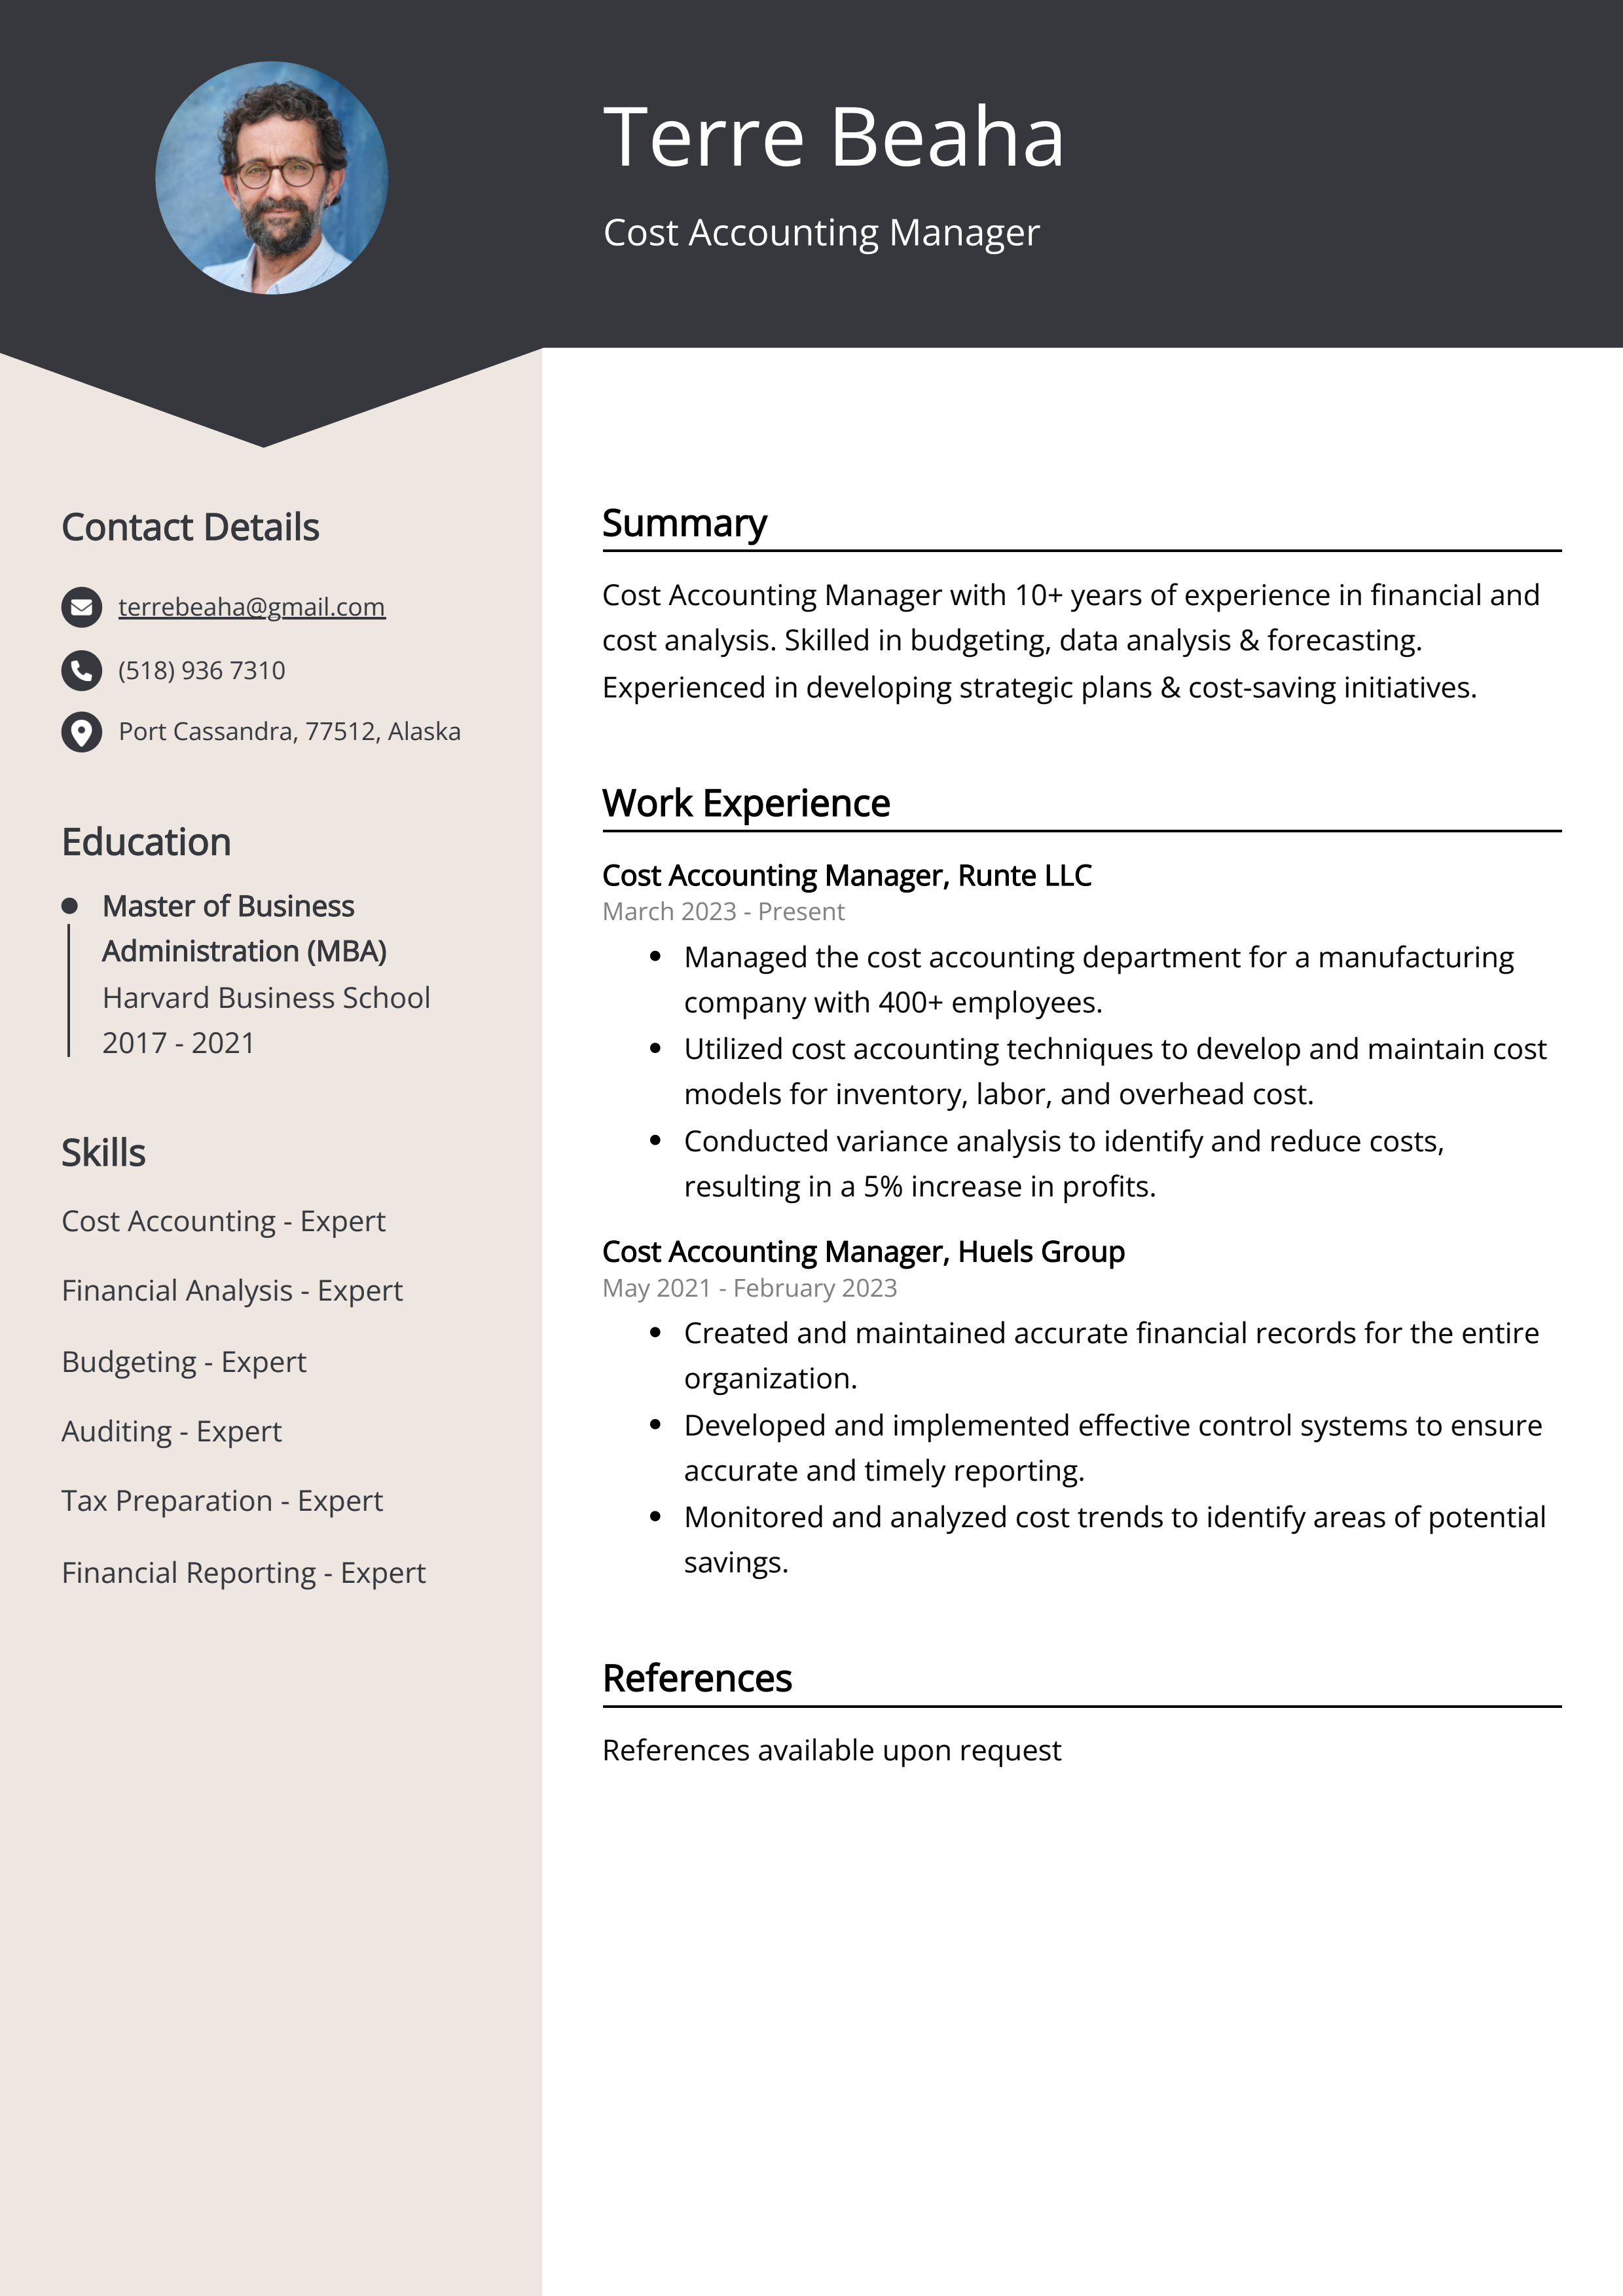 Cost Accounting Manager CV Example